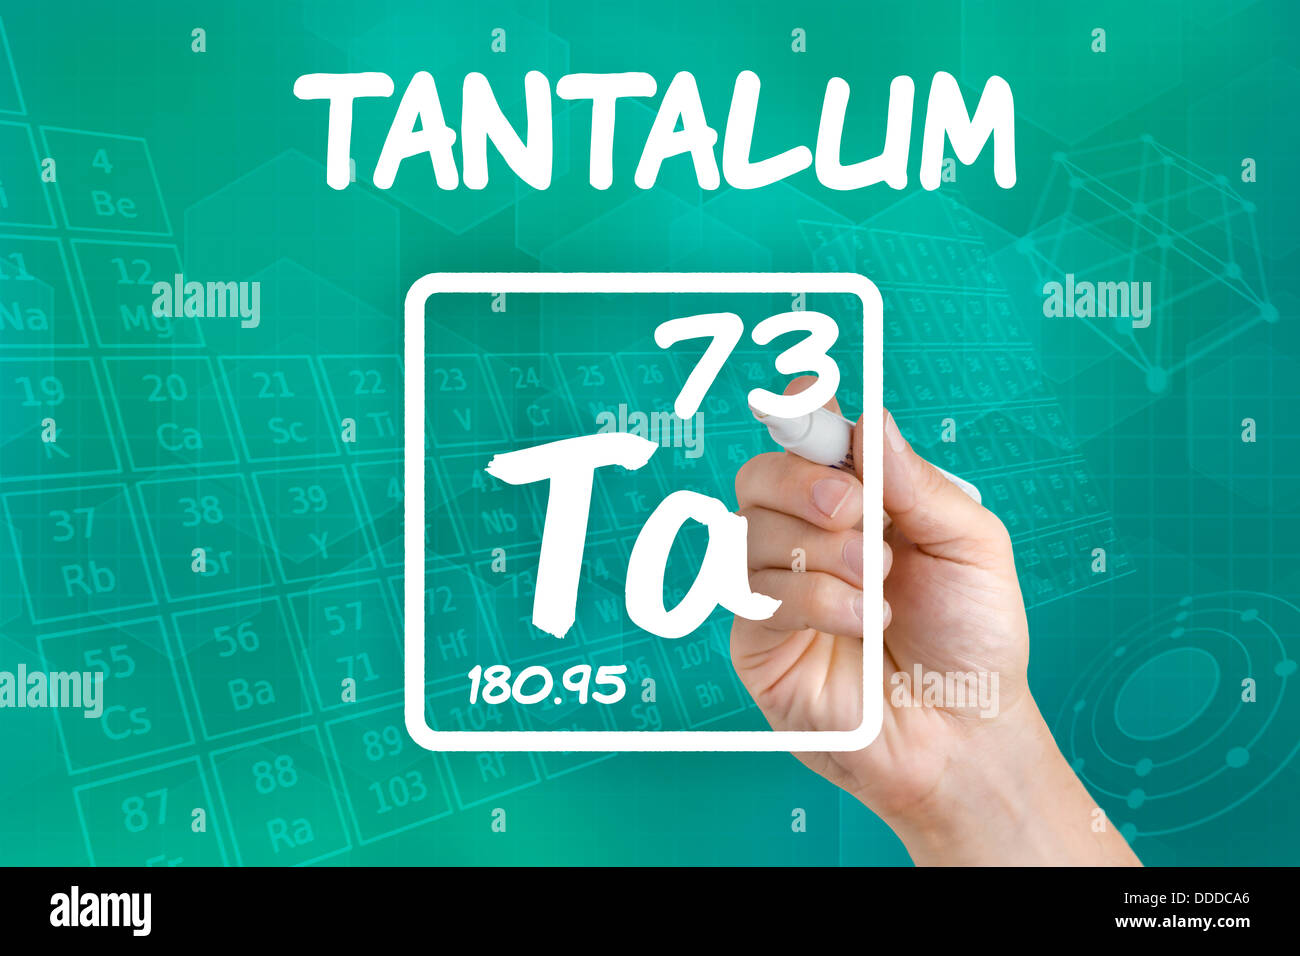 Symbol for the chemical element tantalum Stock Photo